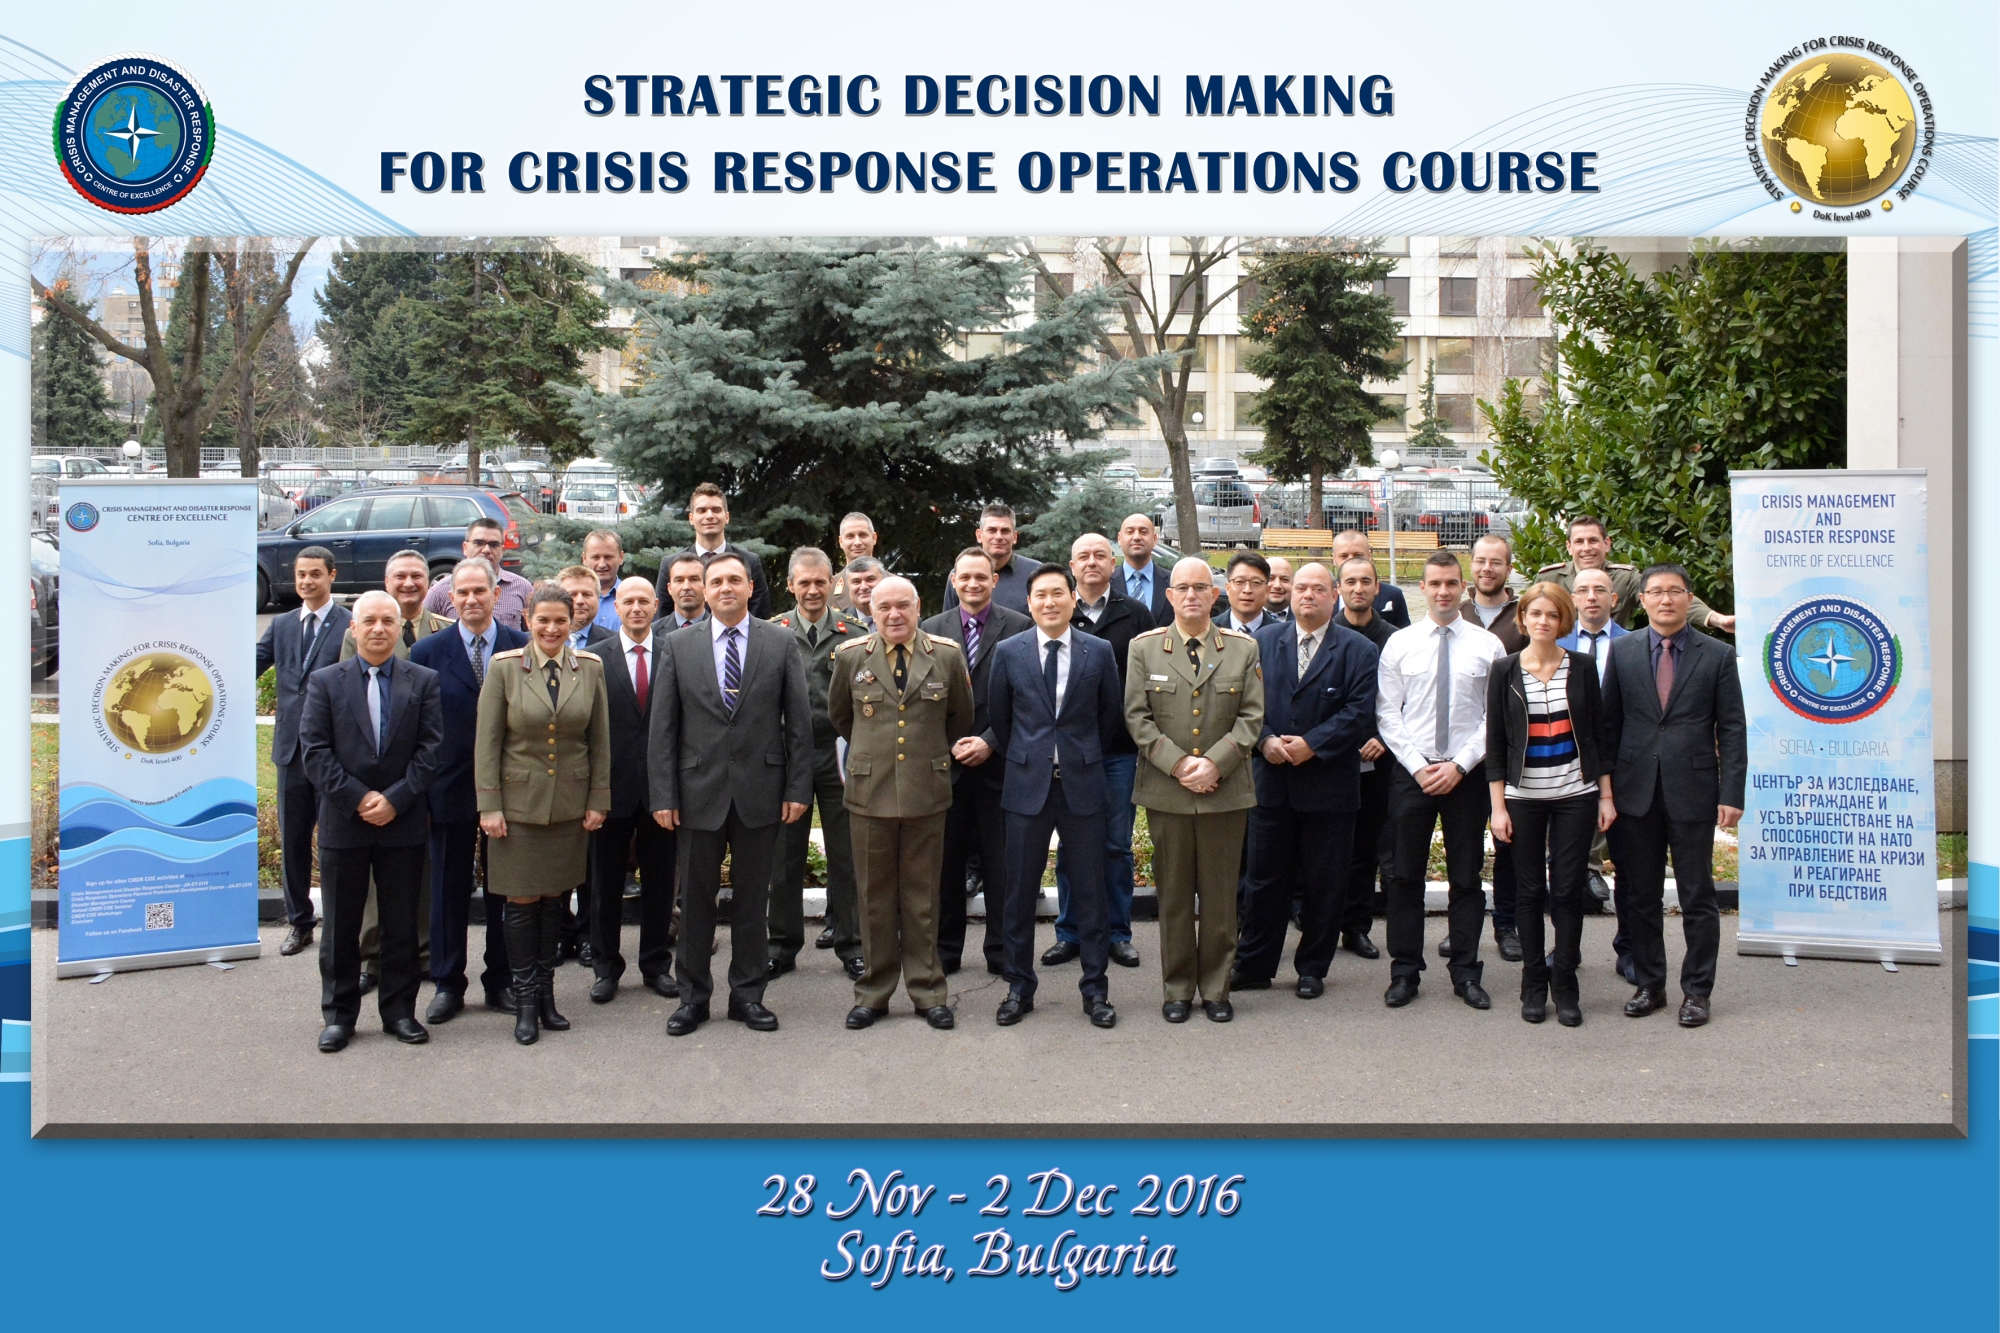 Strategic Decision Making for Crisis Response Operations Course draws to a close